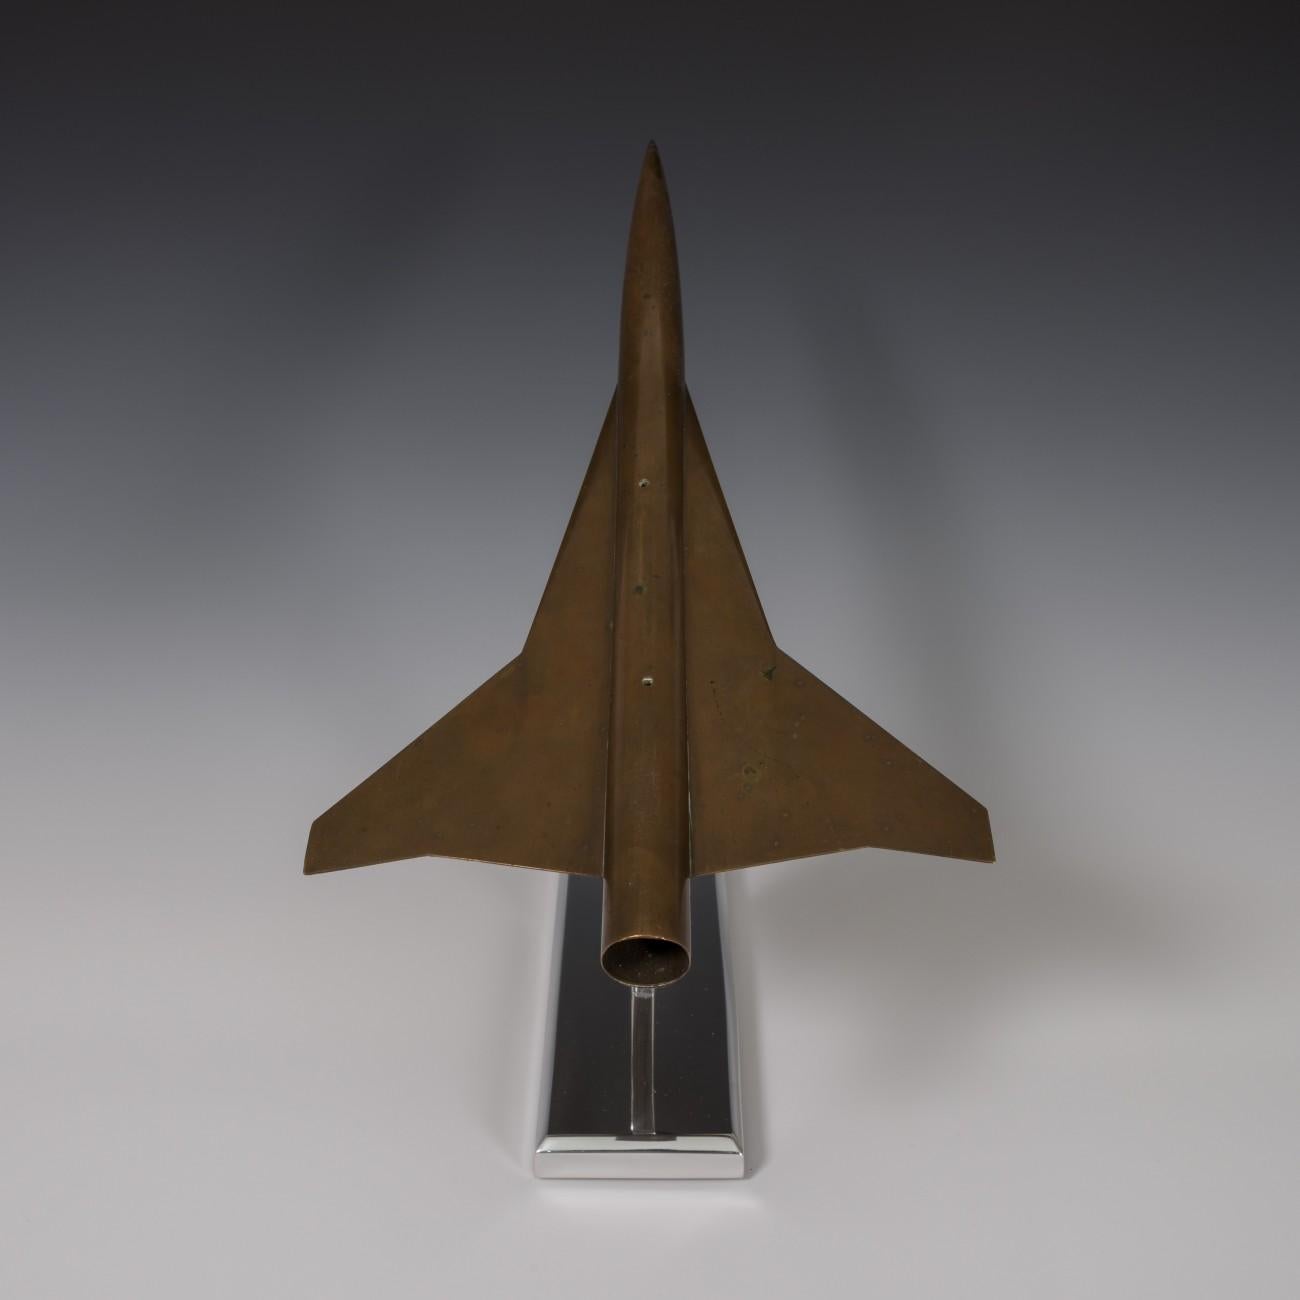 A rare scale model of the Lockheed L-2000 made for use in a wind-tunnel to assess aerodynamic characteristics, circa 1960. The model was made in brass which has developed a patina that is more like the color of bronze. The aircraft sits on a newly